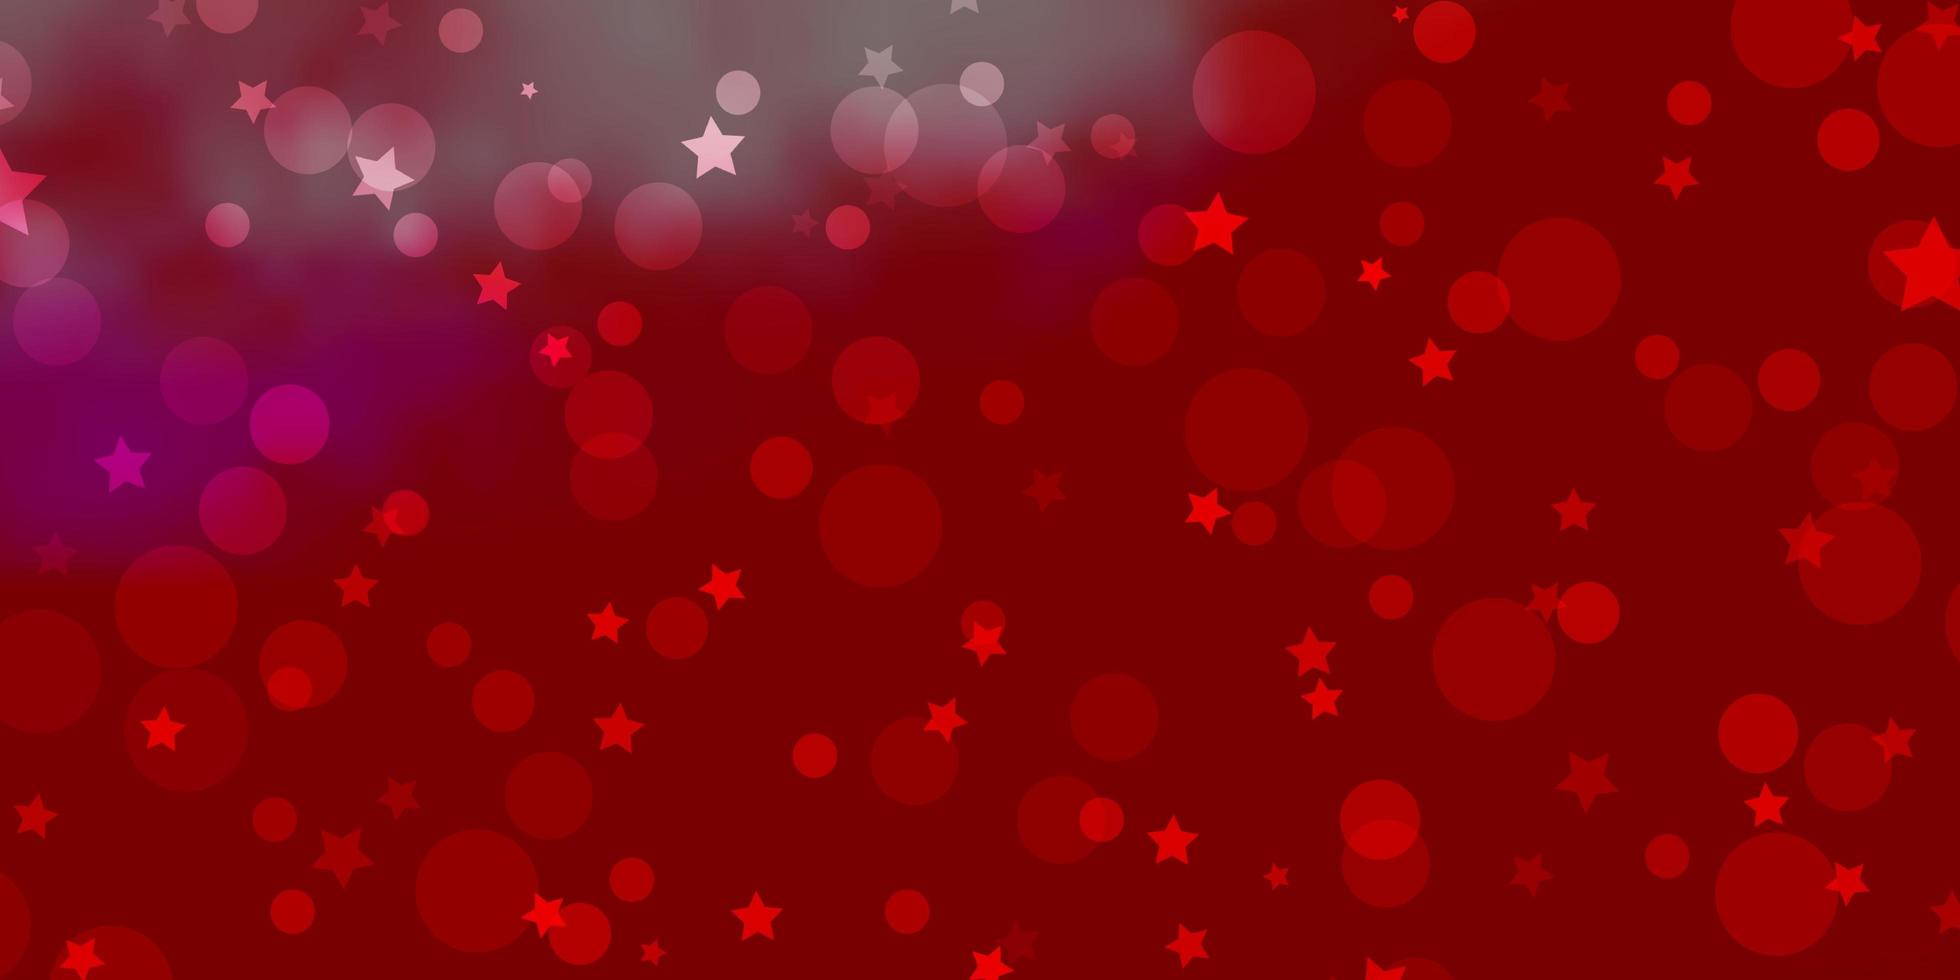 Light Red vector backdrop with circles, stars. Abstract design in gradient style with bubbles, stars. Texture for window blinds, curtains.